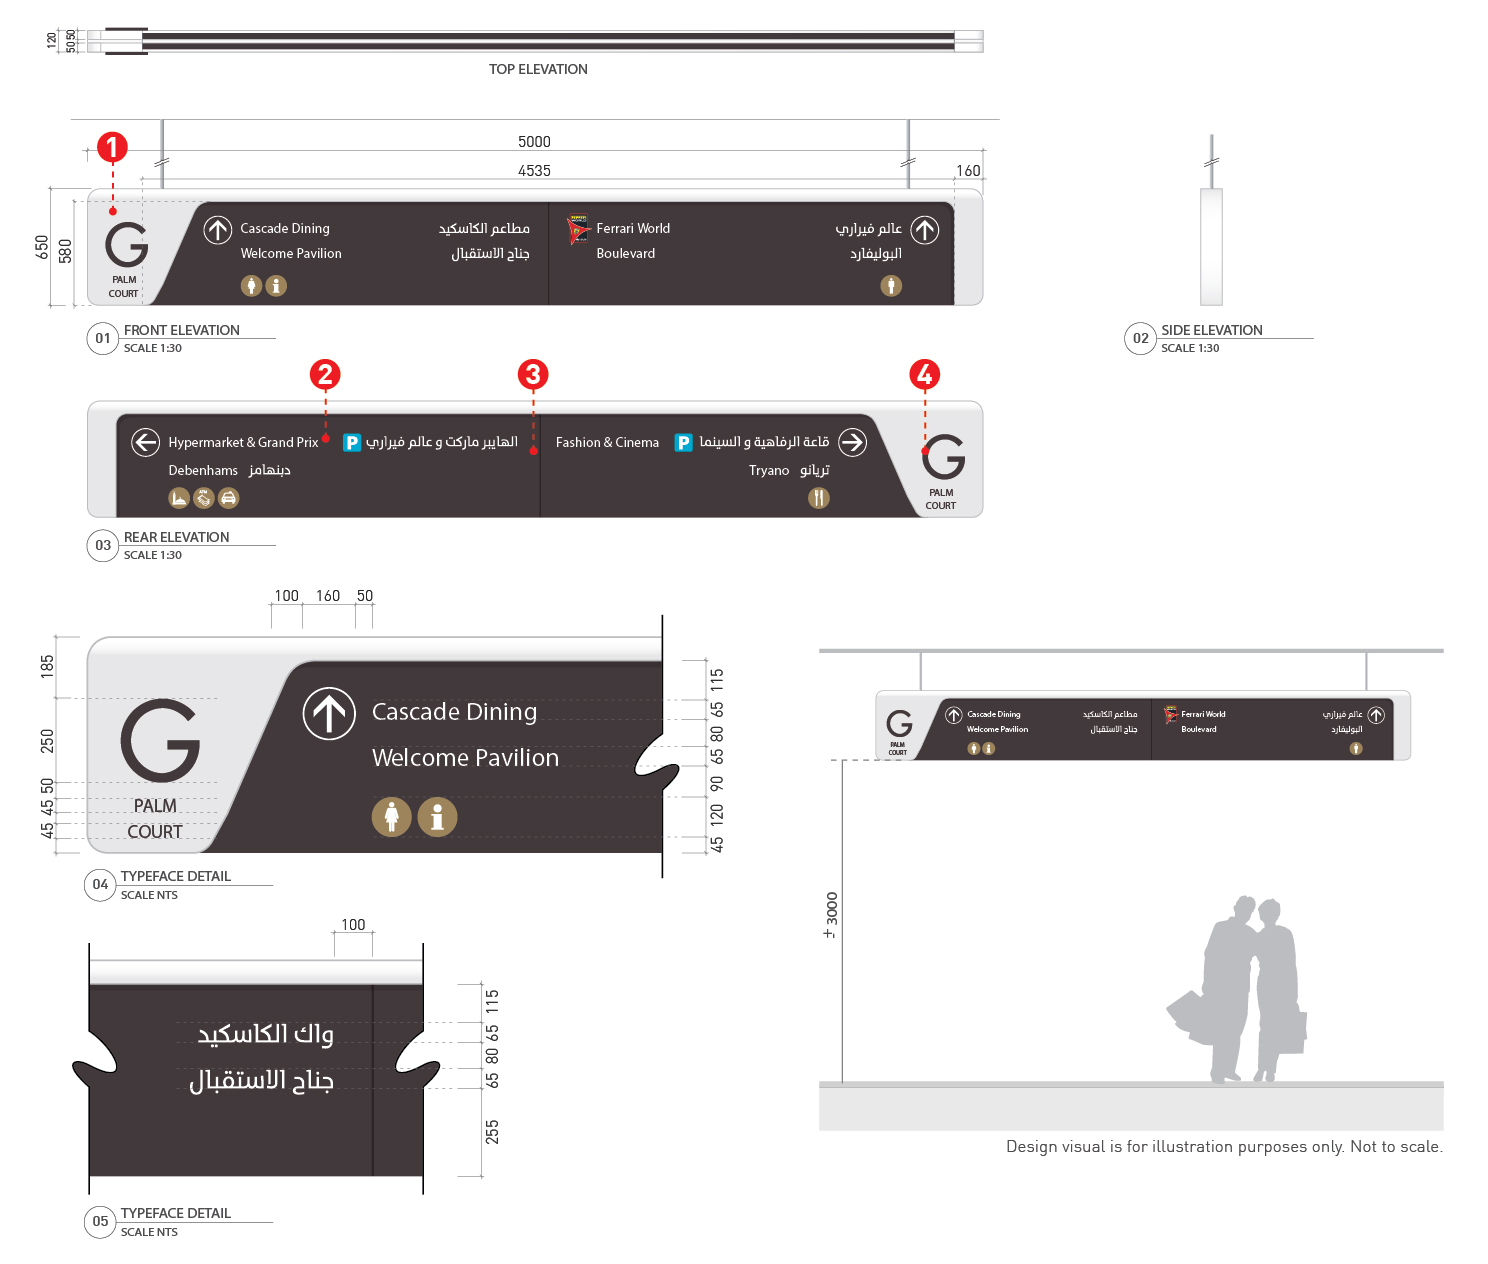 Mall Wayfinding & Signage Design For Yas Mall By DezignTechnic ...